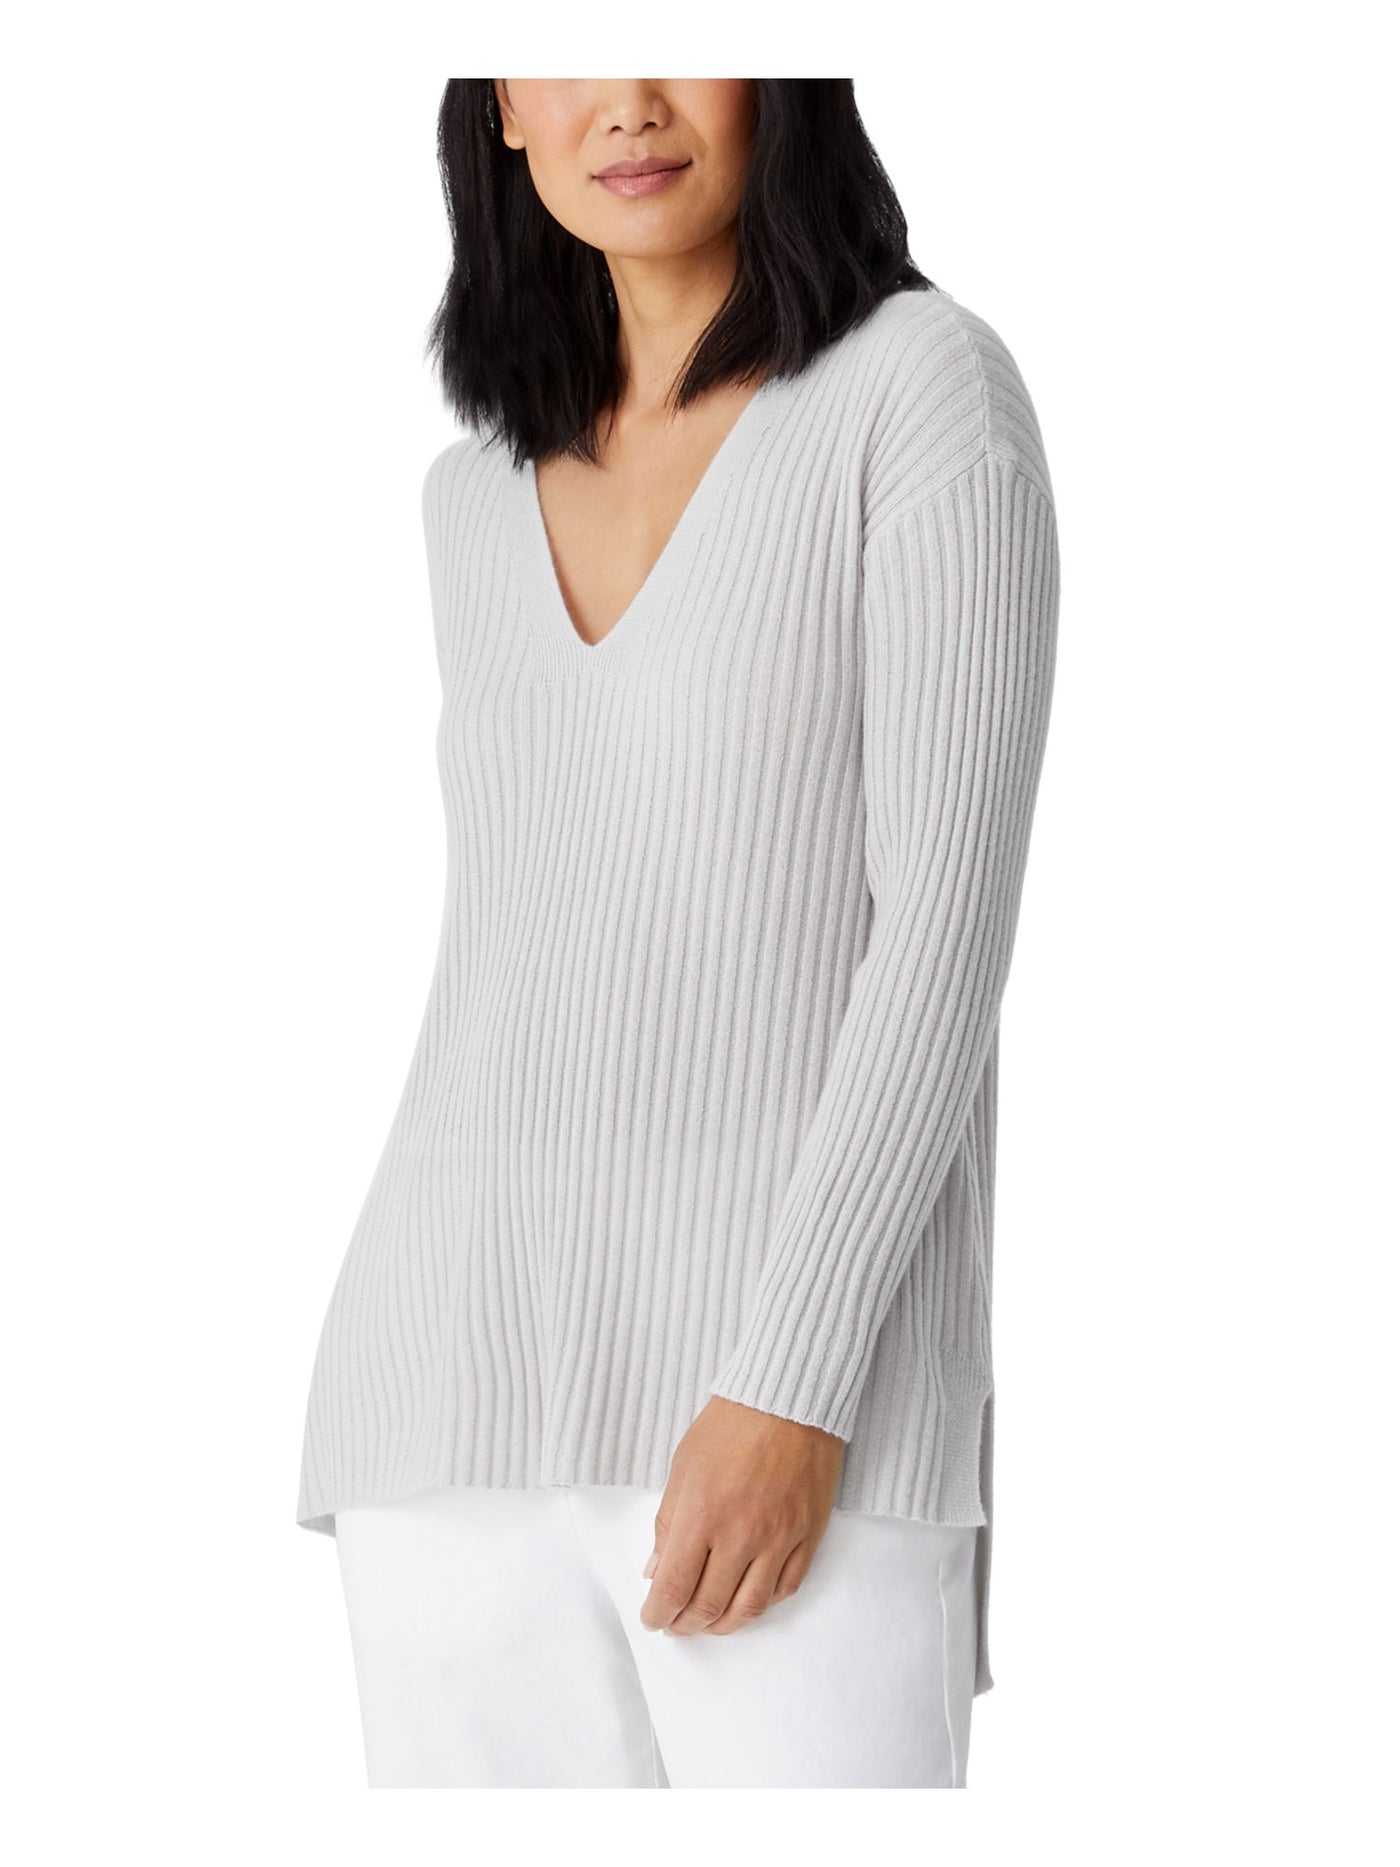 EILEEN FISHER Womens Gray Cashmere Ribbed Hi-lo Hem Long Sleeve V Neck Wear To Work Tunic Sweater XS